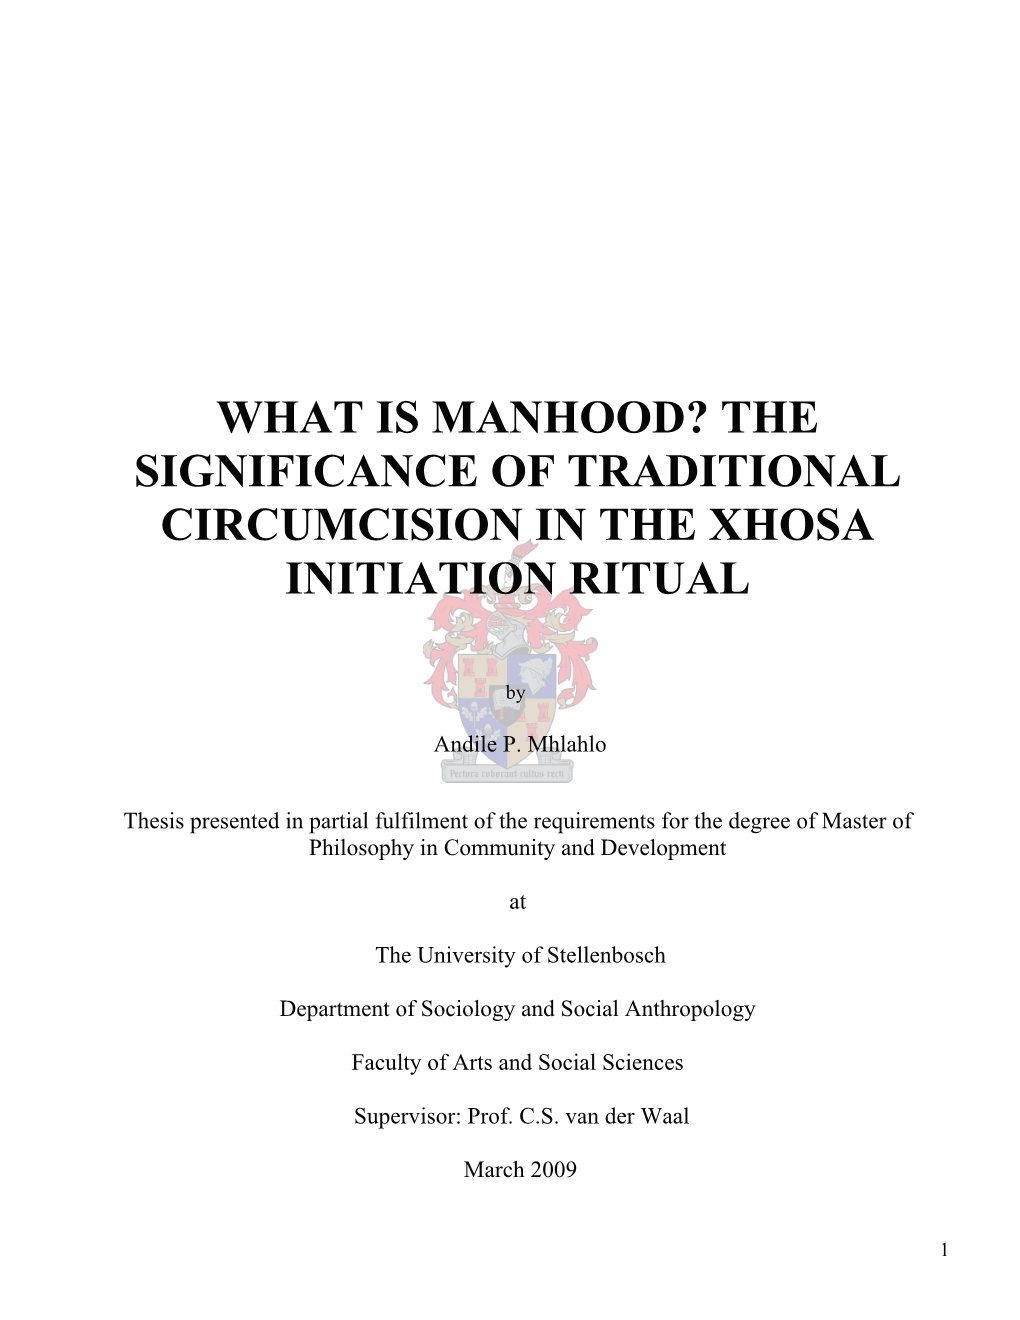 What Is Manhood? the Significance of Traditional Circumcision in the Xhosa Initiation Ritual